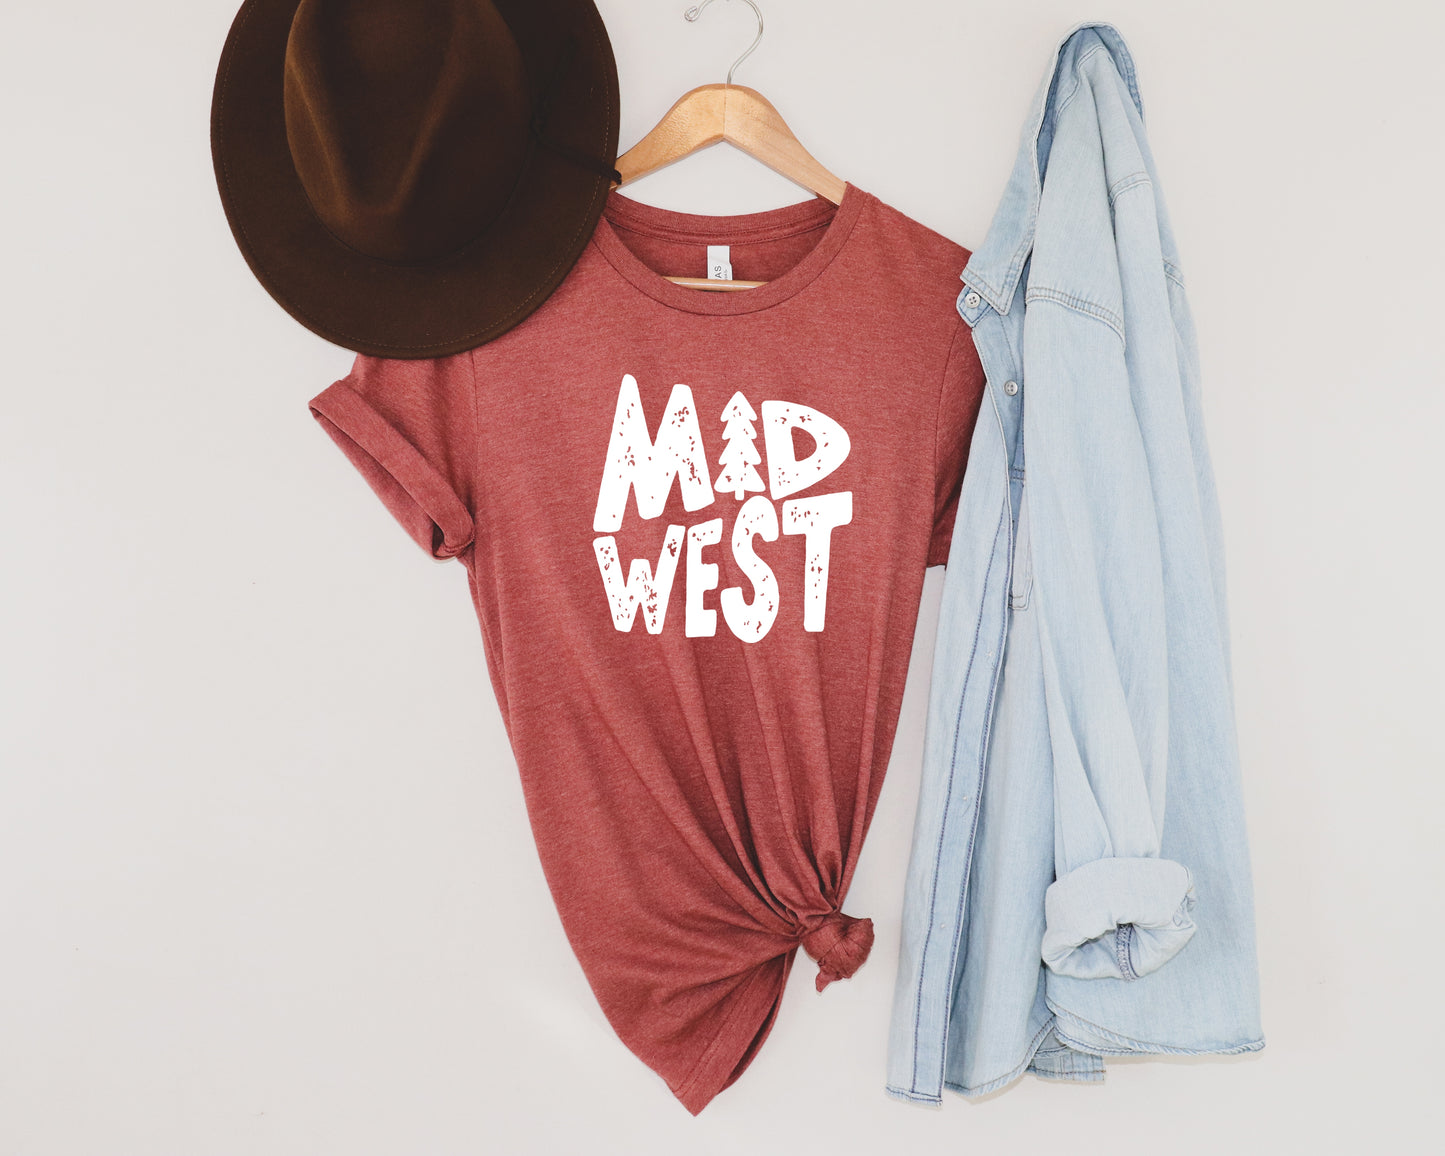 Midwest Pine Tee